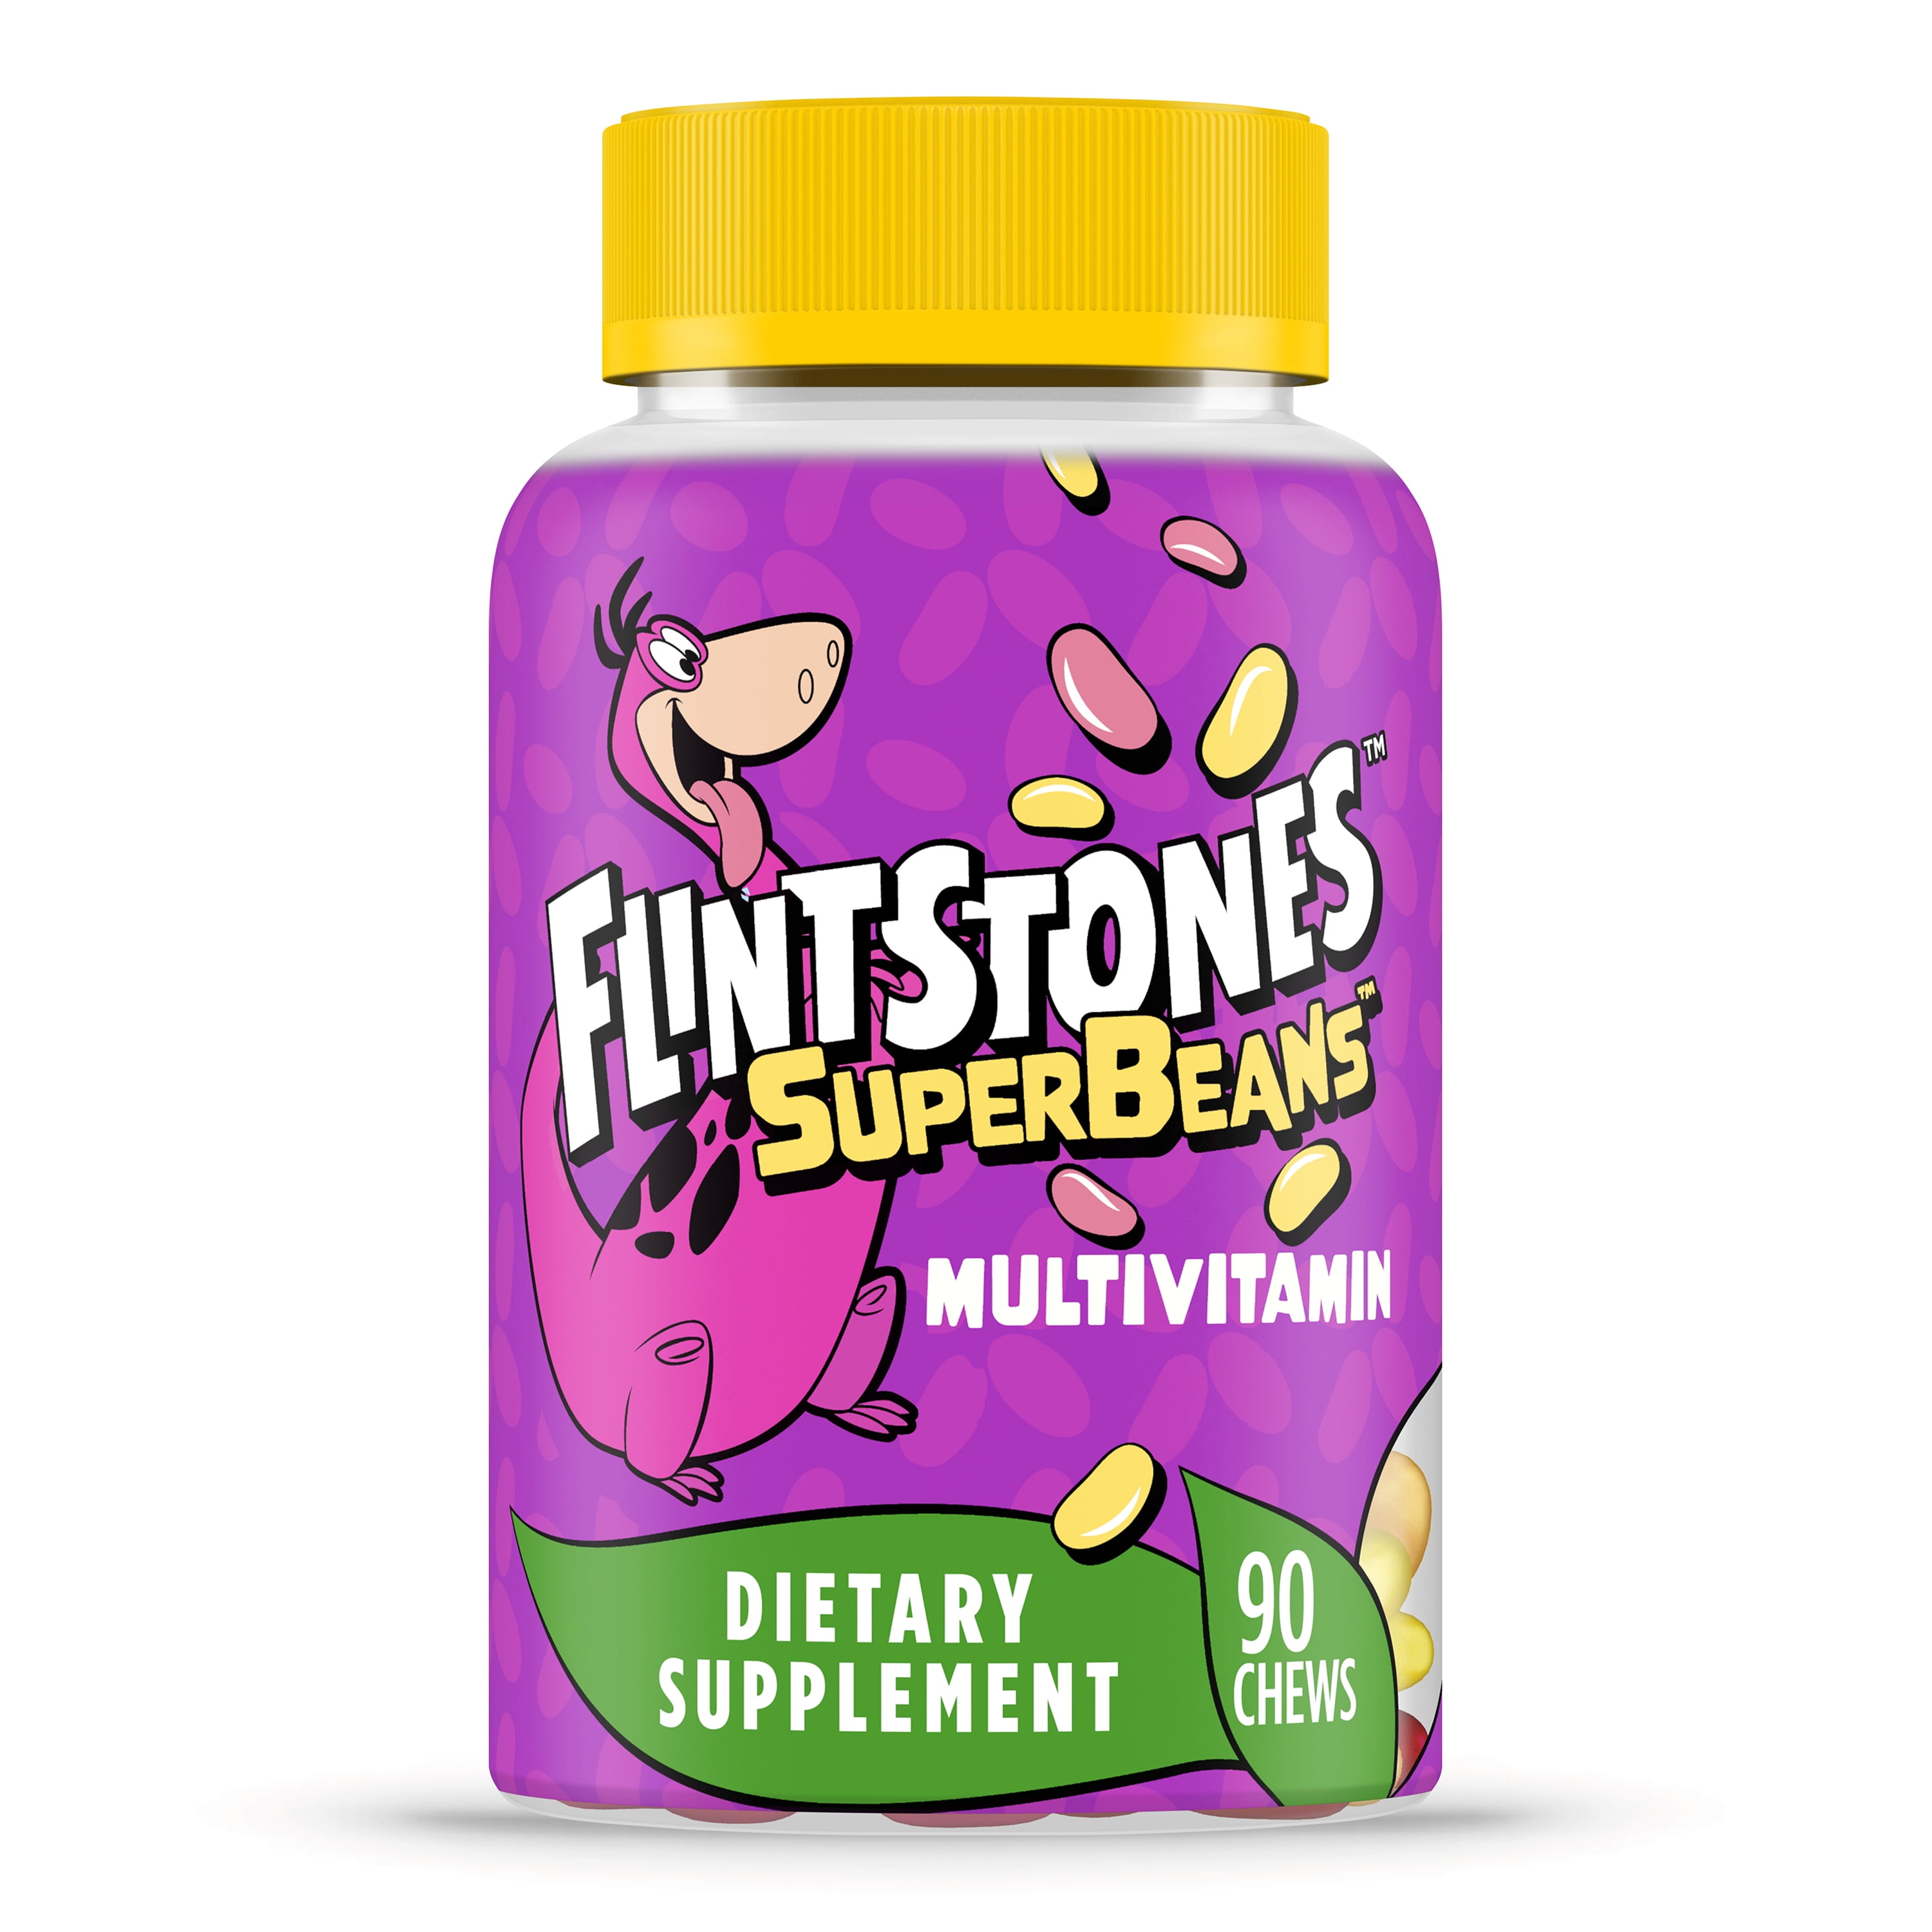 Flintstones SuperBeans Multivitamin with Immunity Support, 90 Count